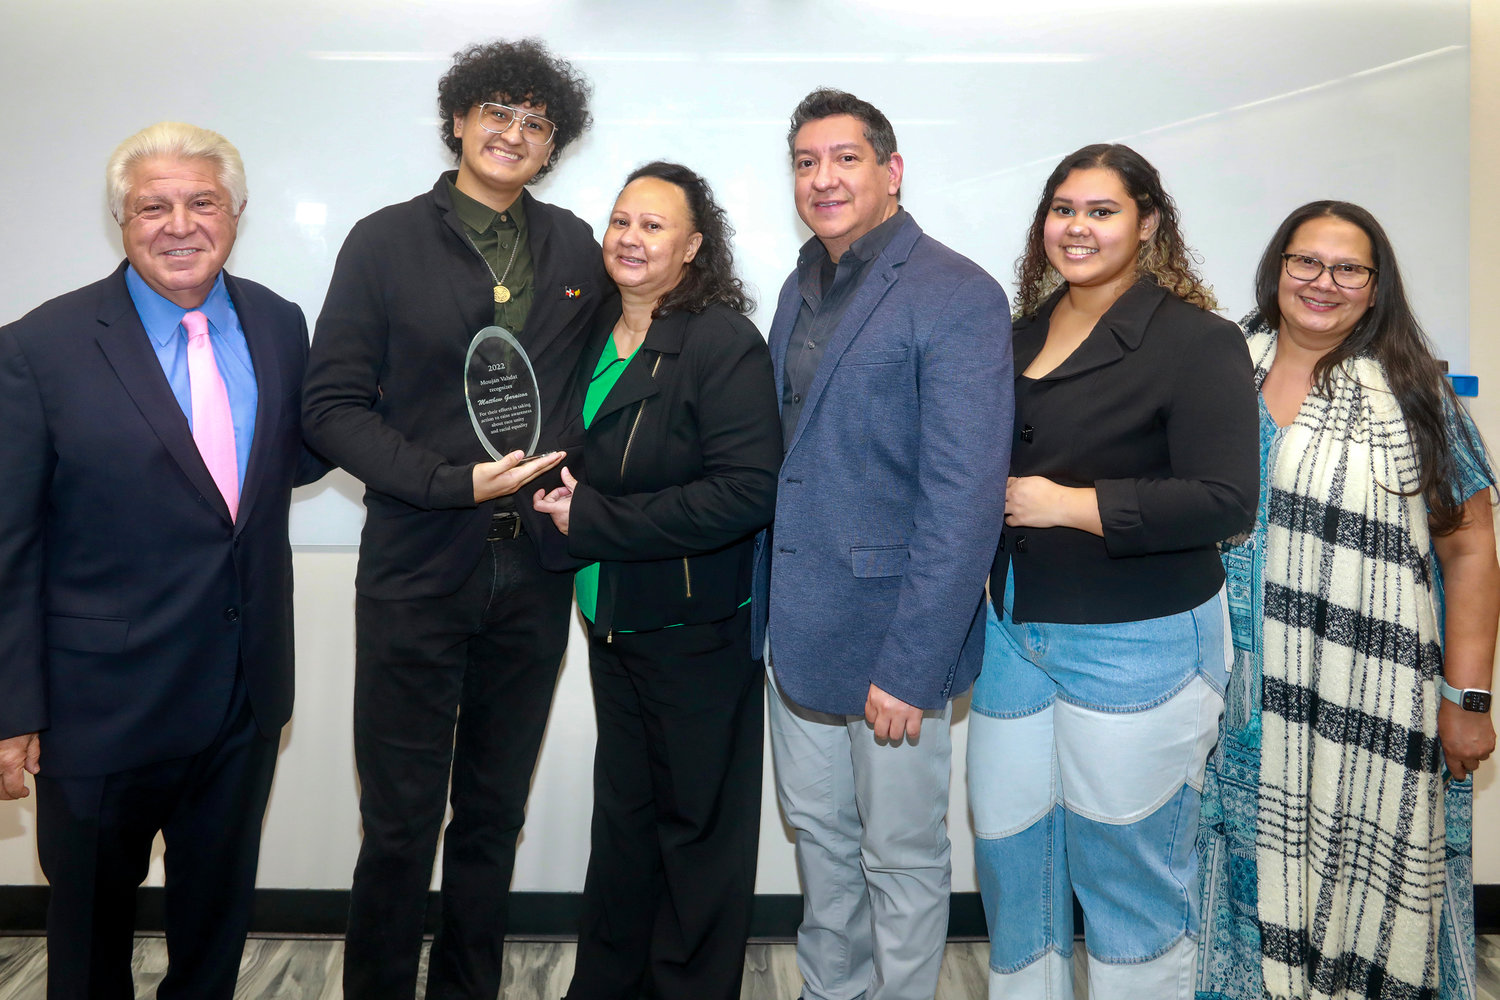 Matthew Garaicoa, a Lehman College student, is the winner of the inaugural ‘Race Unity Award.’ Moujan Vahdat one of the city’s largest landowners and founder of Elmo Realty Co., created the competition to increase race unity.